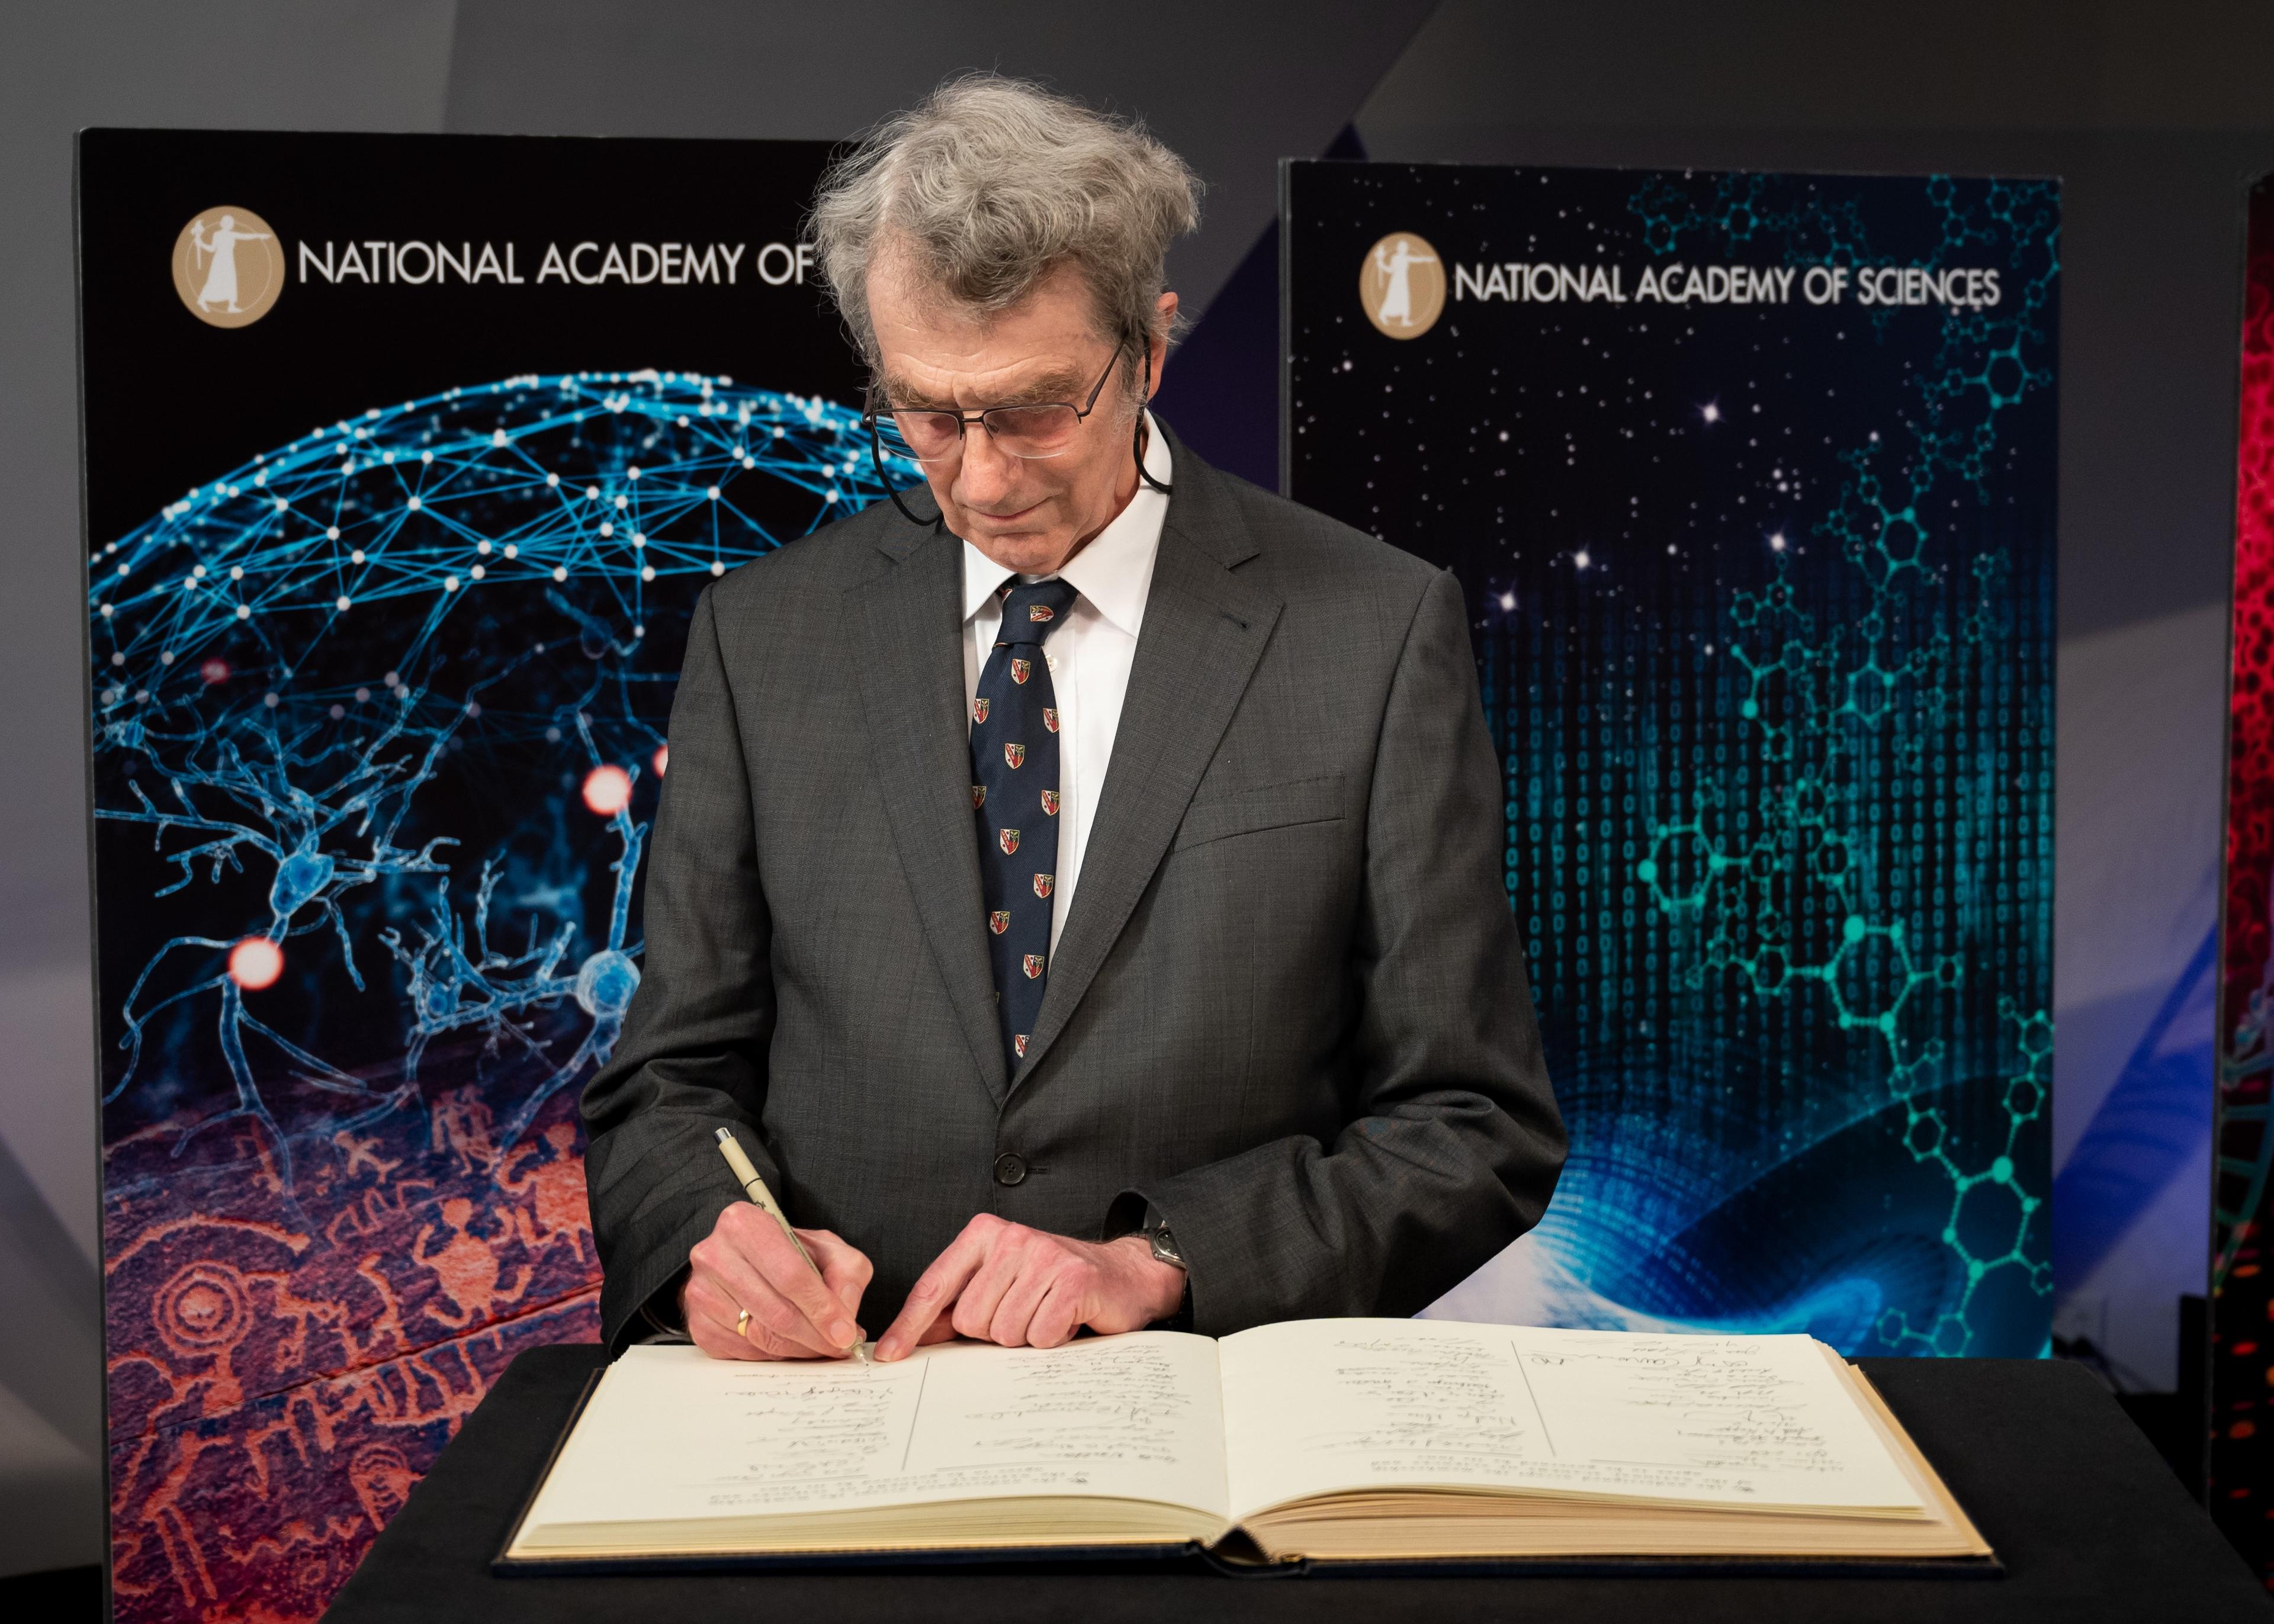 Signing the ledger at my induction into the US National Academy of Sciences in April 2022.